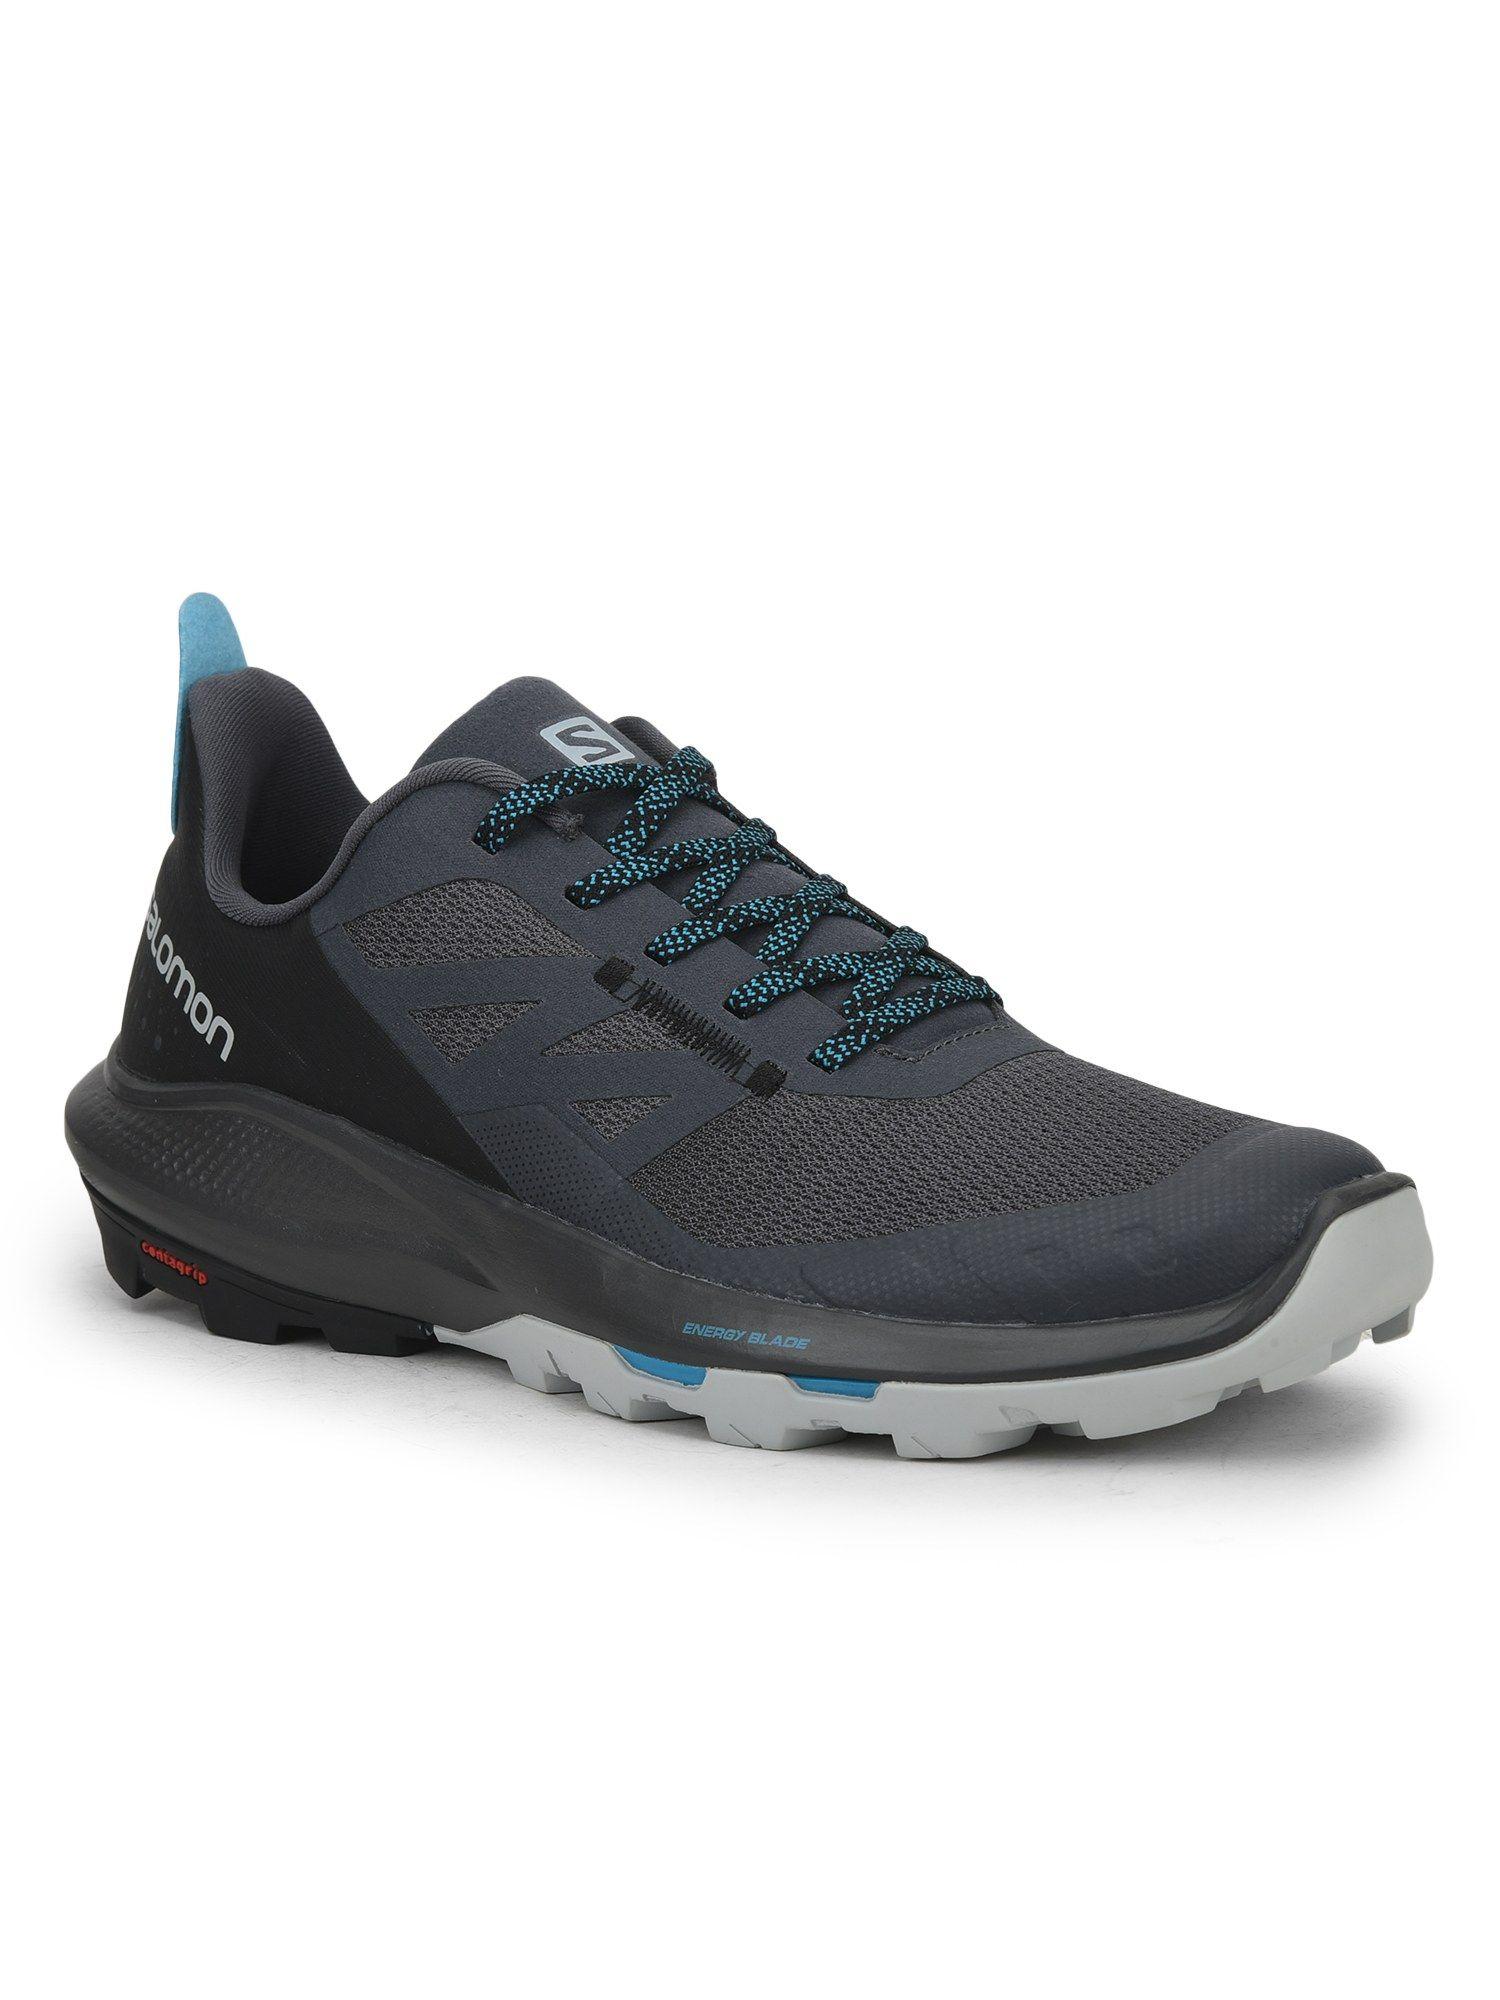 mens outpulse hiking shoes